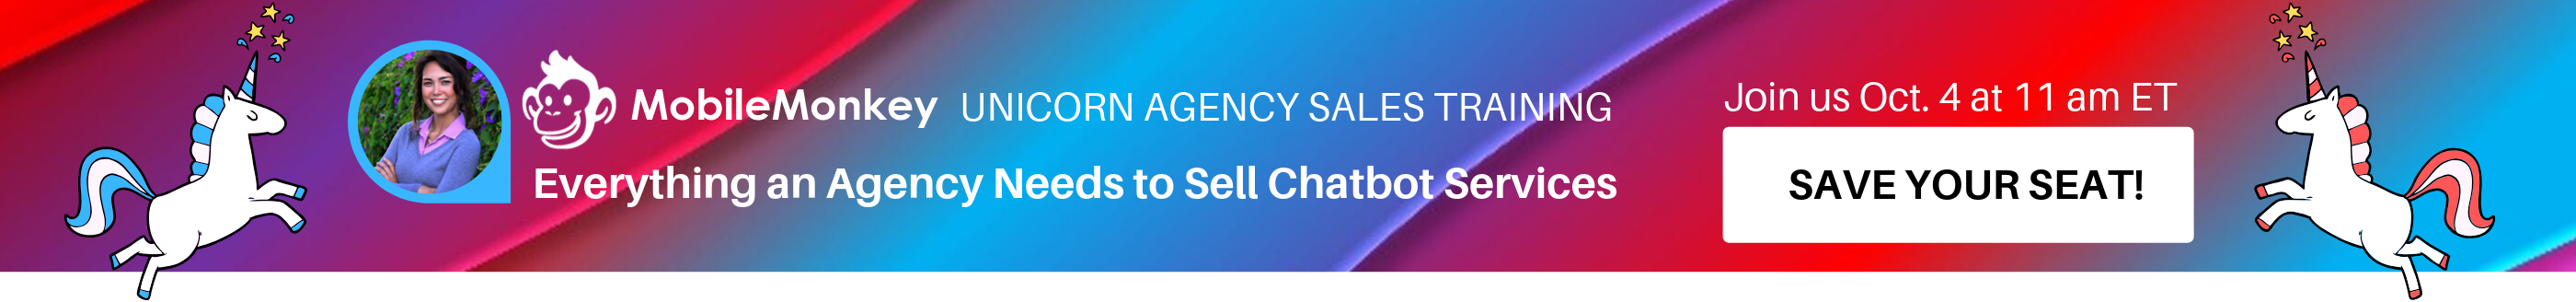 Chatbots and Messenger Marketing Digital Agency - TURN CONVERSATIONS INTO  SALES